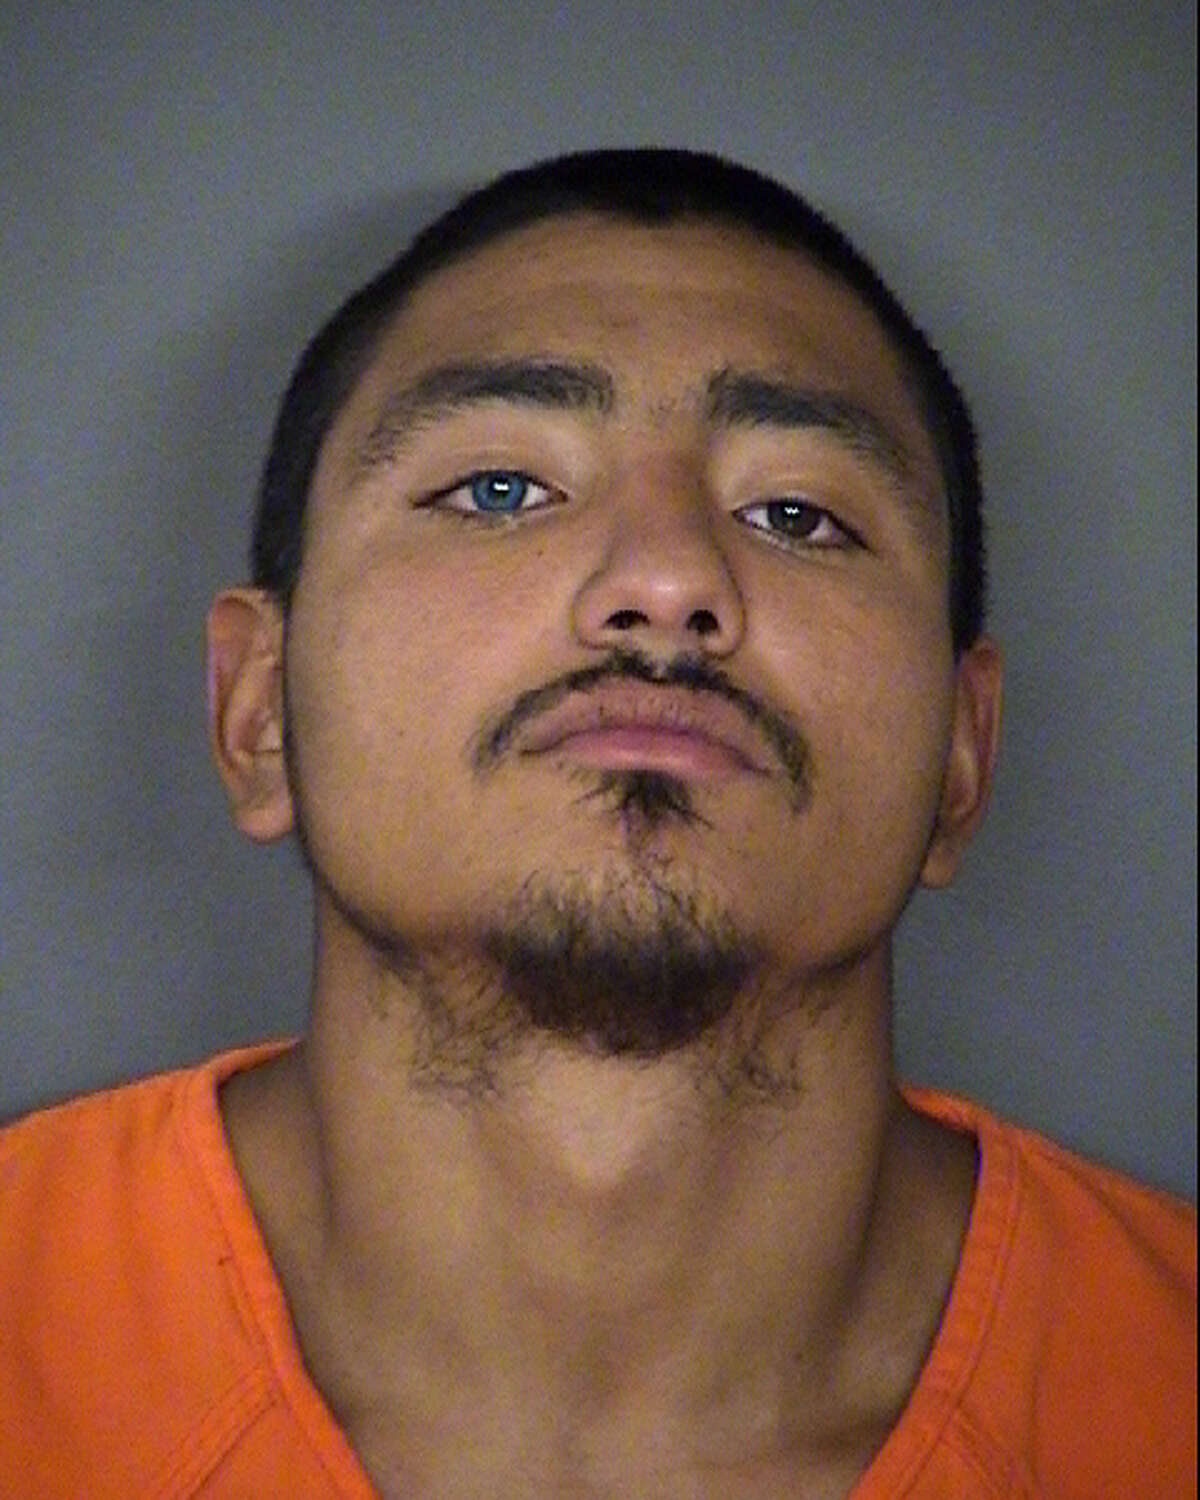 Jesus Estrada Mata, 21, faces a charge of aggravated assault with a deadly weapon in connection with the stabbing. He was booked into the Bexar County Jail on a $50,000 bond.